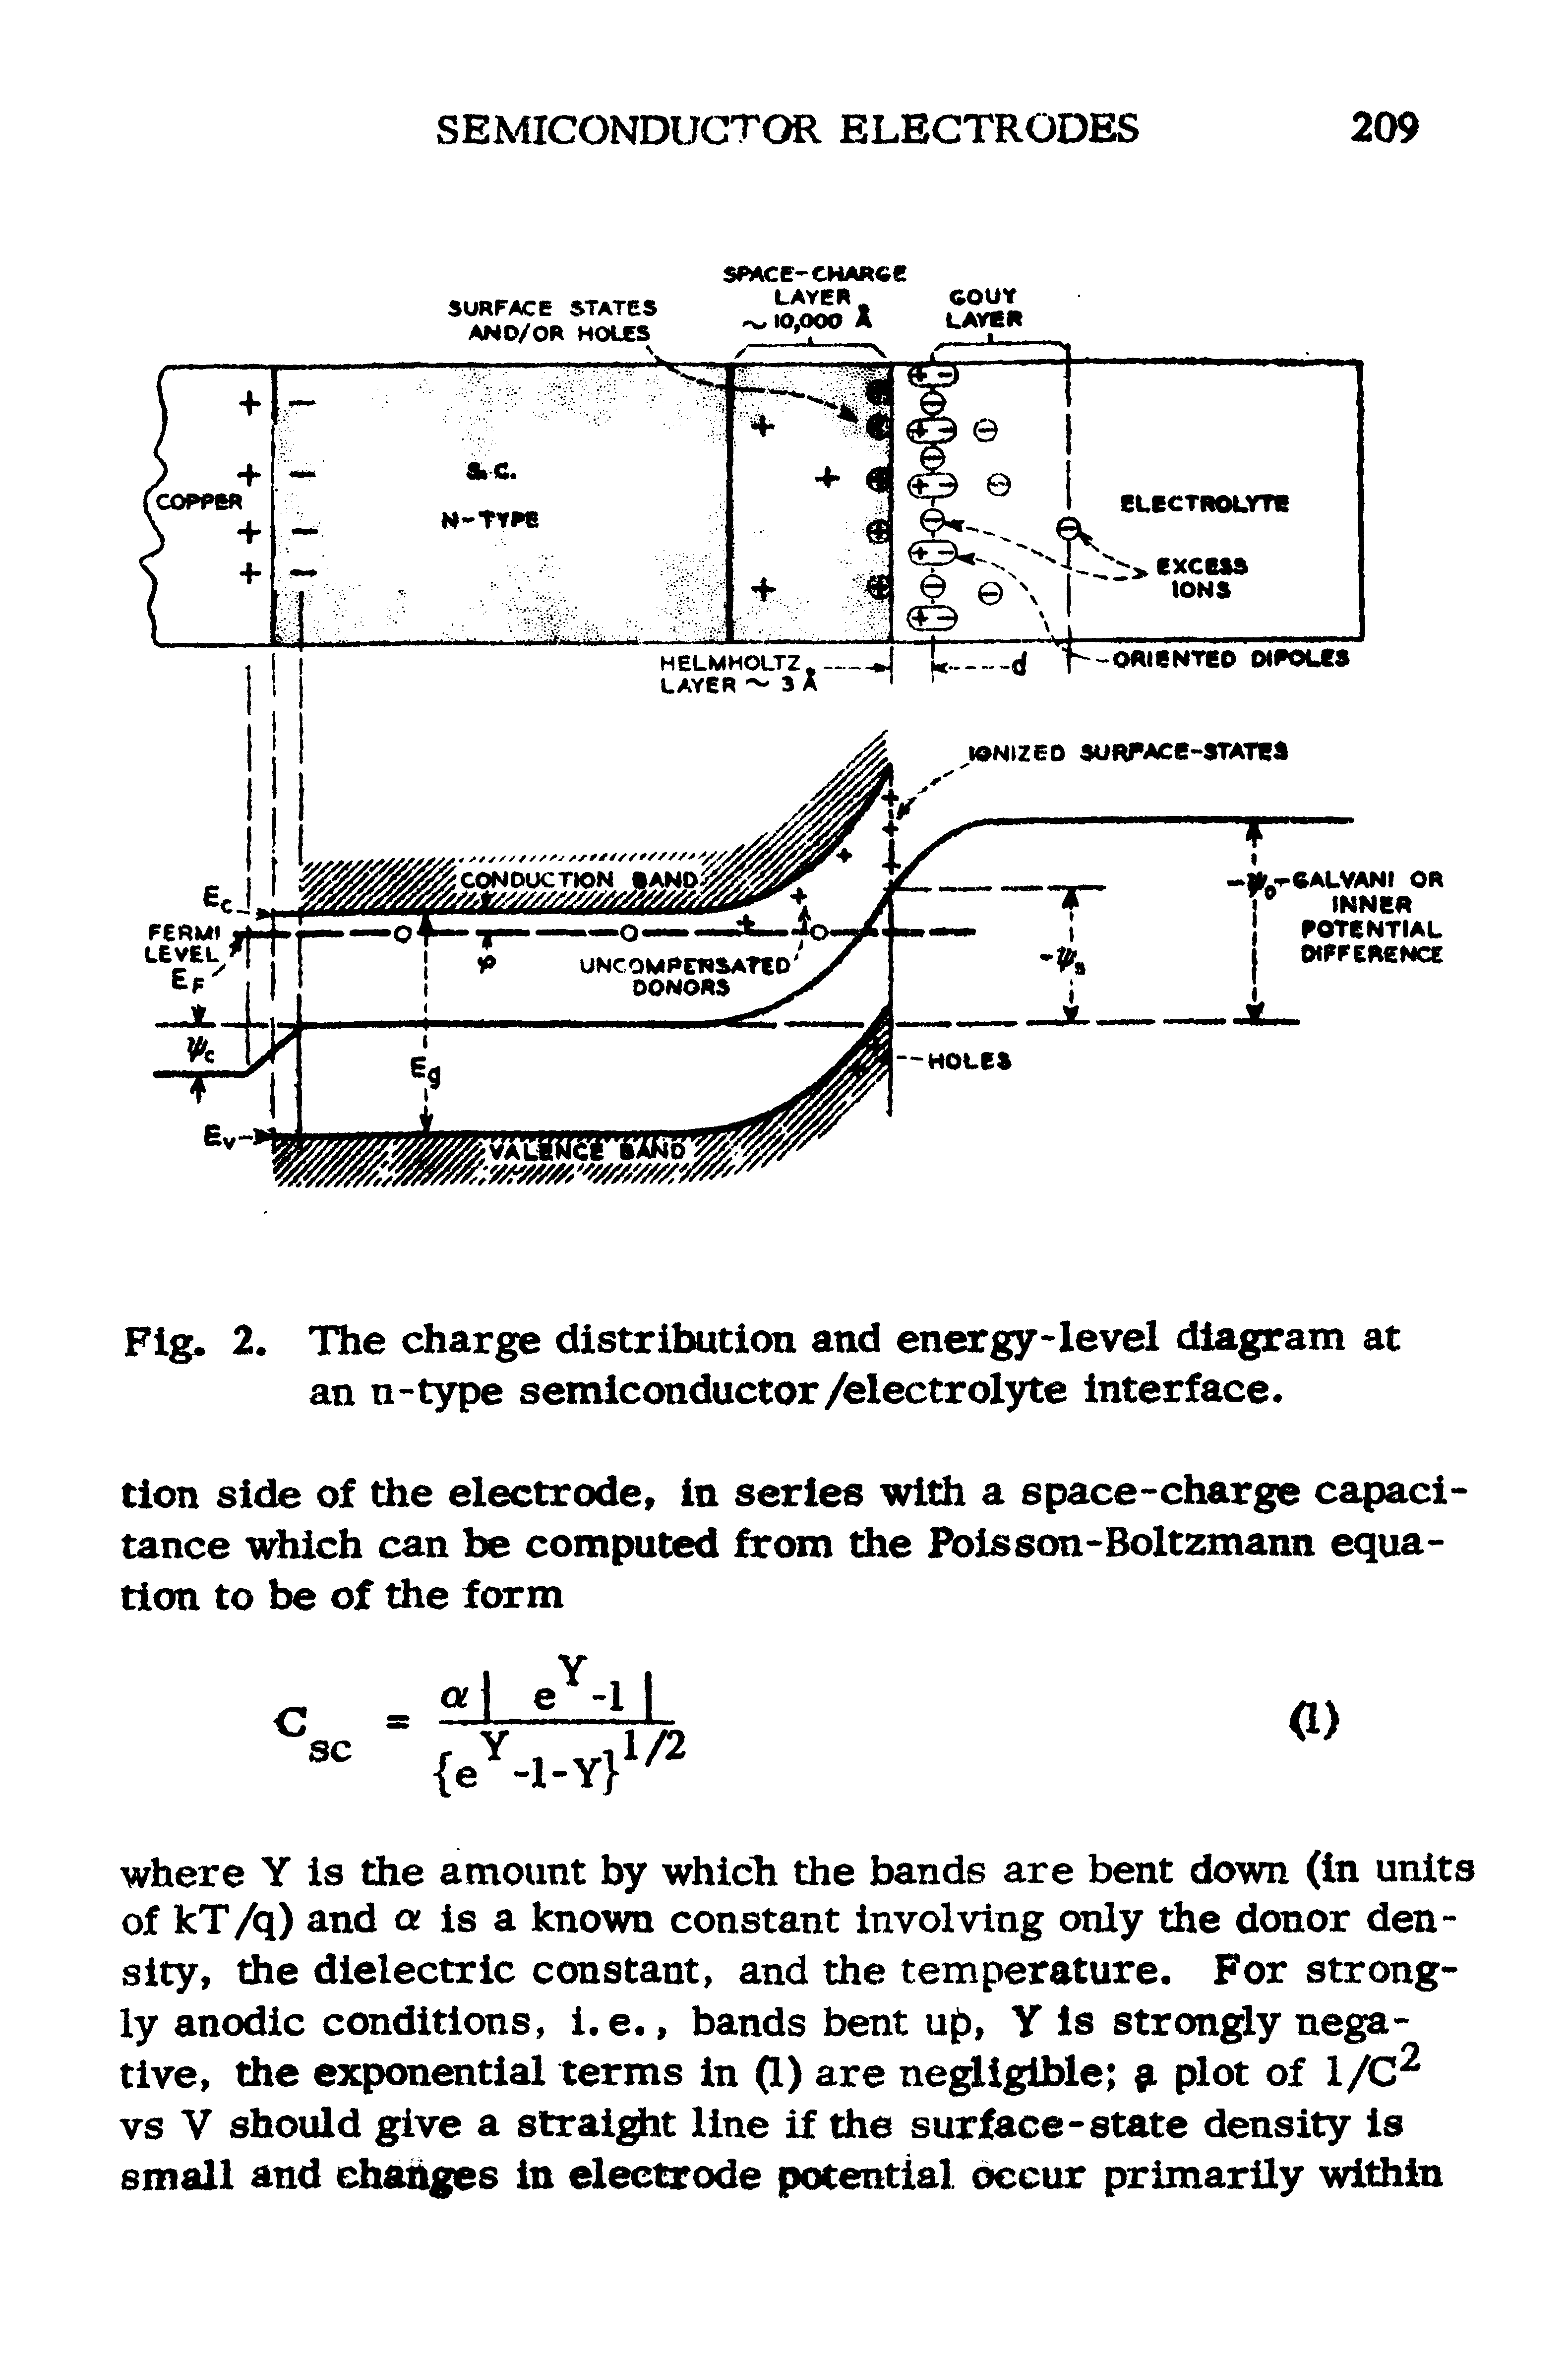 Fig. 2. The charge distribution and energy-level diagram at an n-type semiconductor/electrolyte interface.